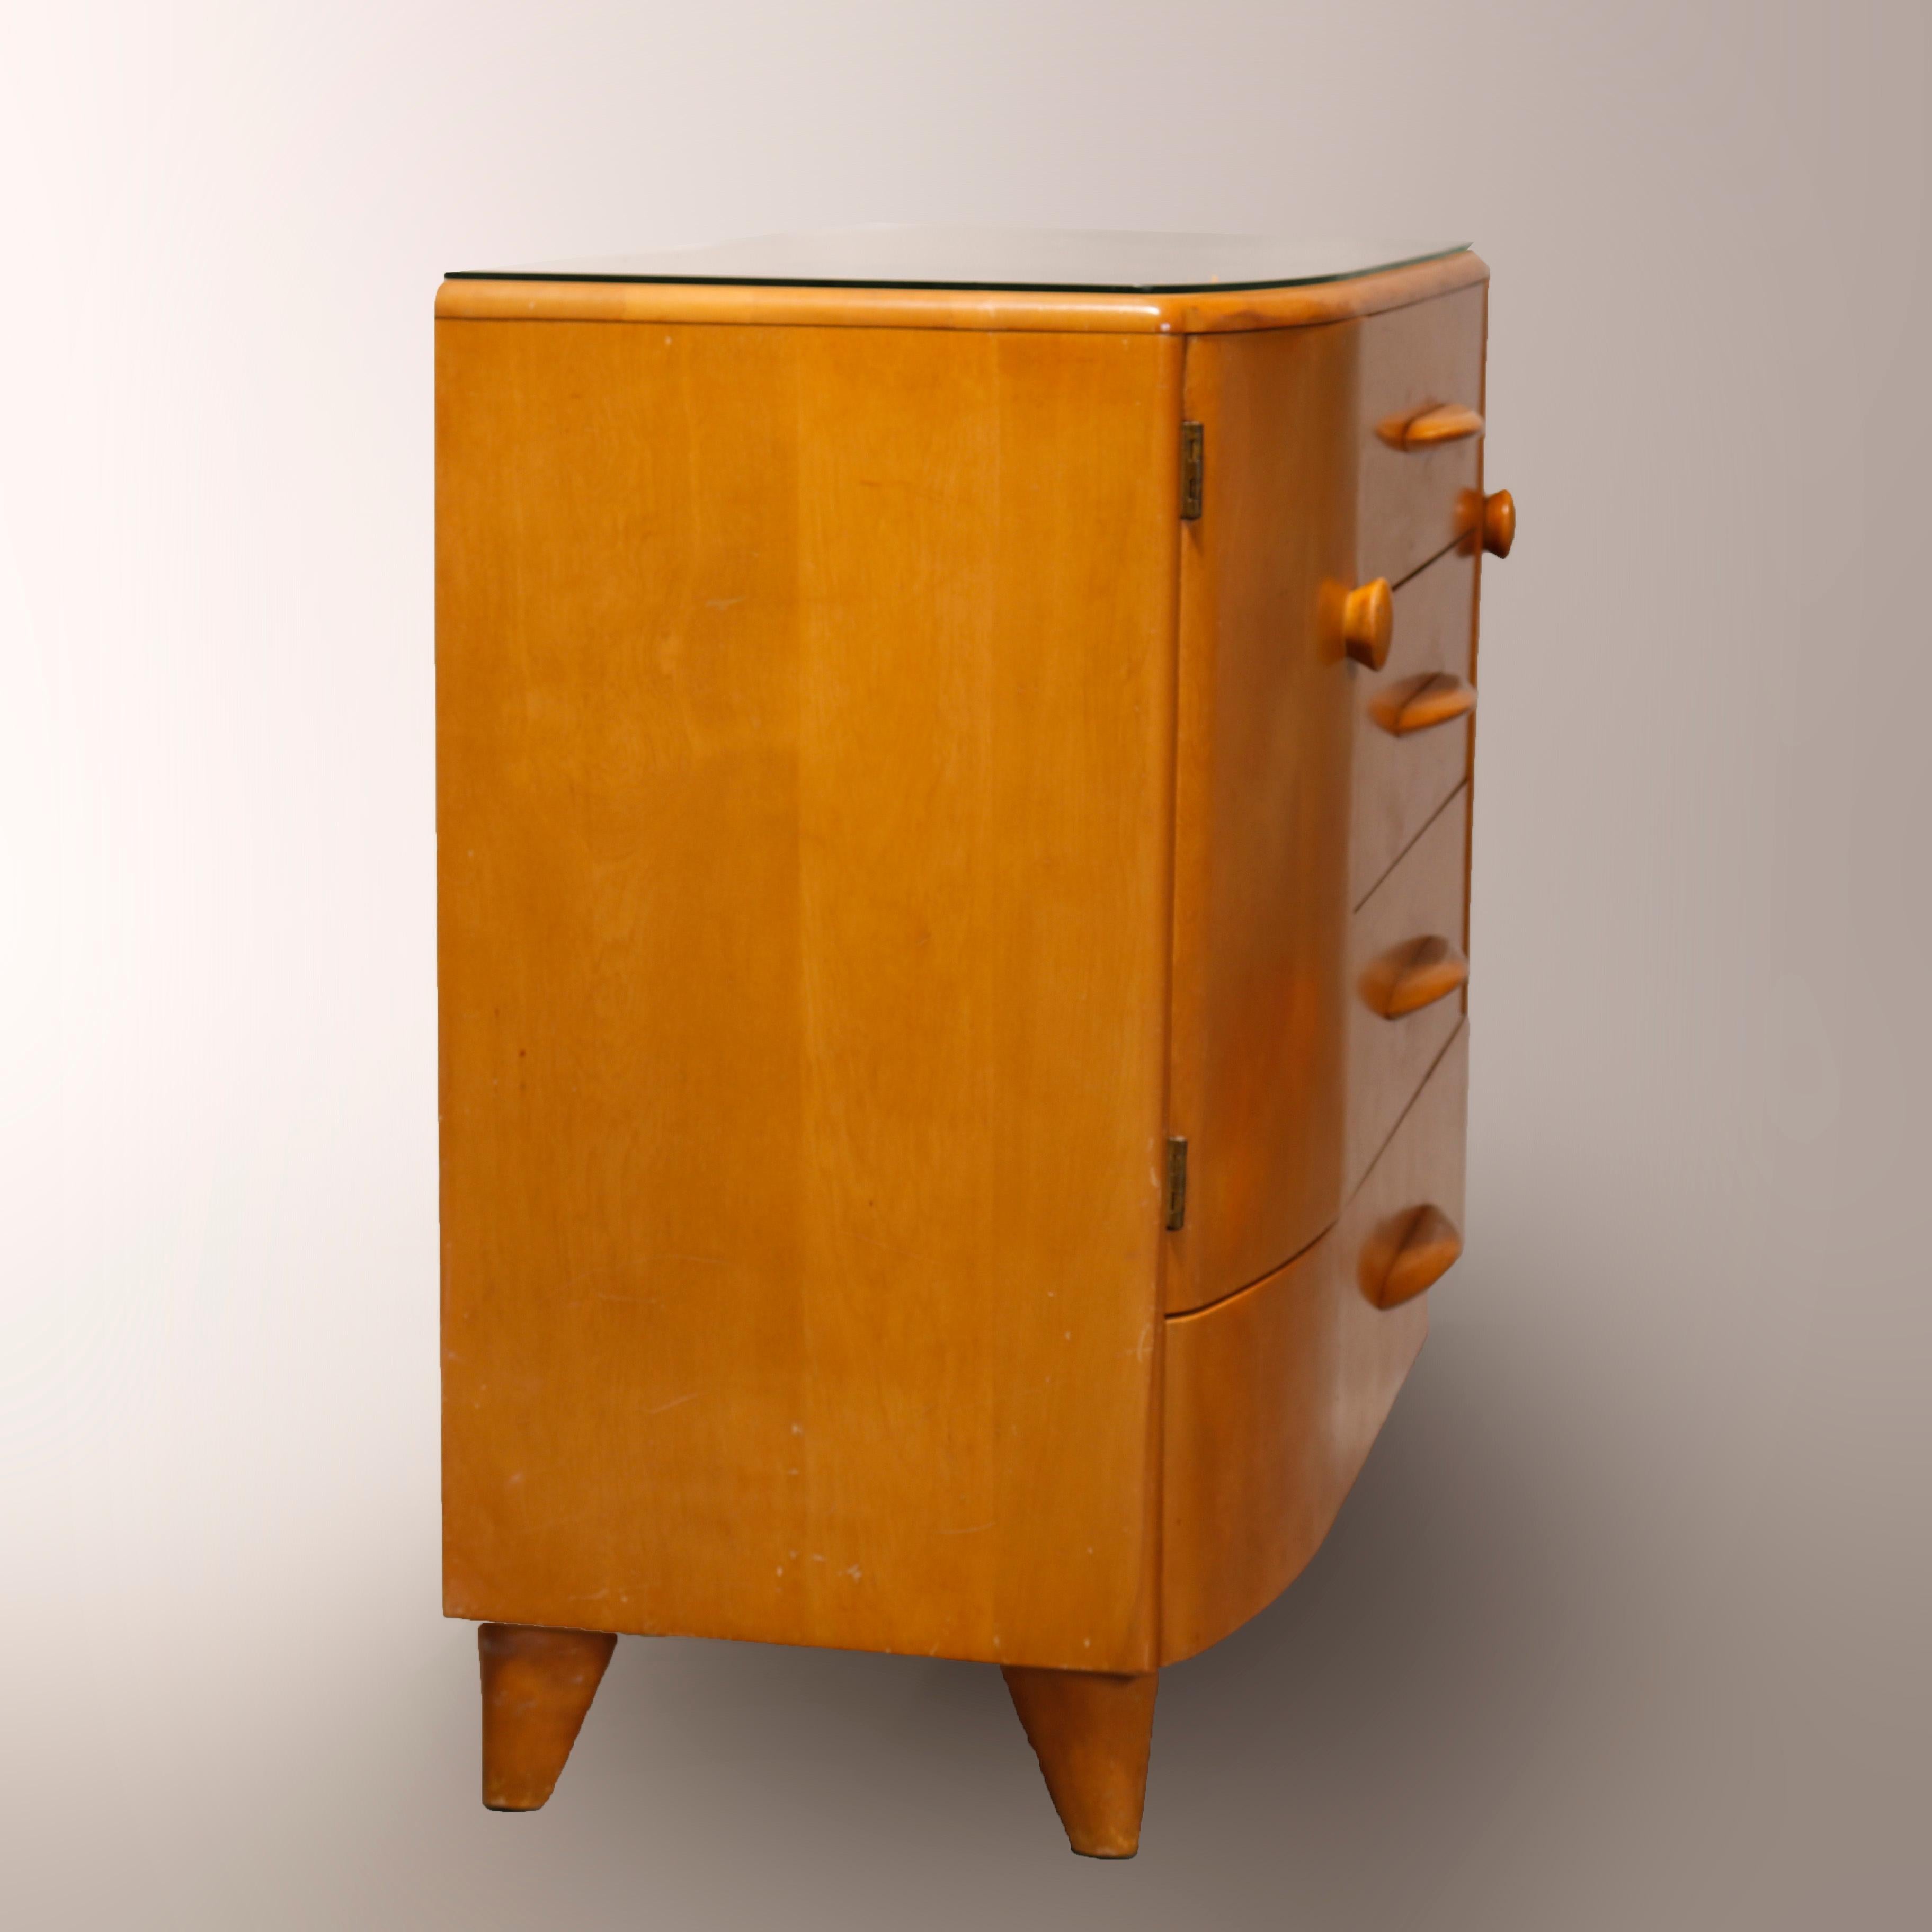 Carved Mid-Century Modern Heywood Wakefield Sideboard in Champagne, 20th Century